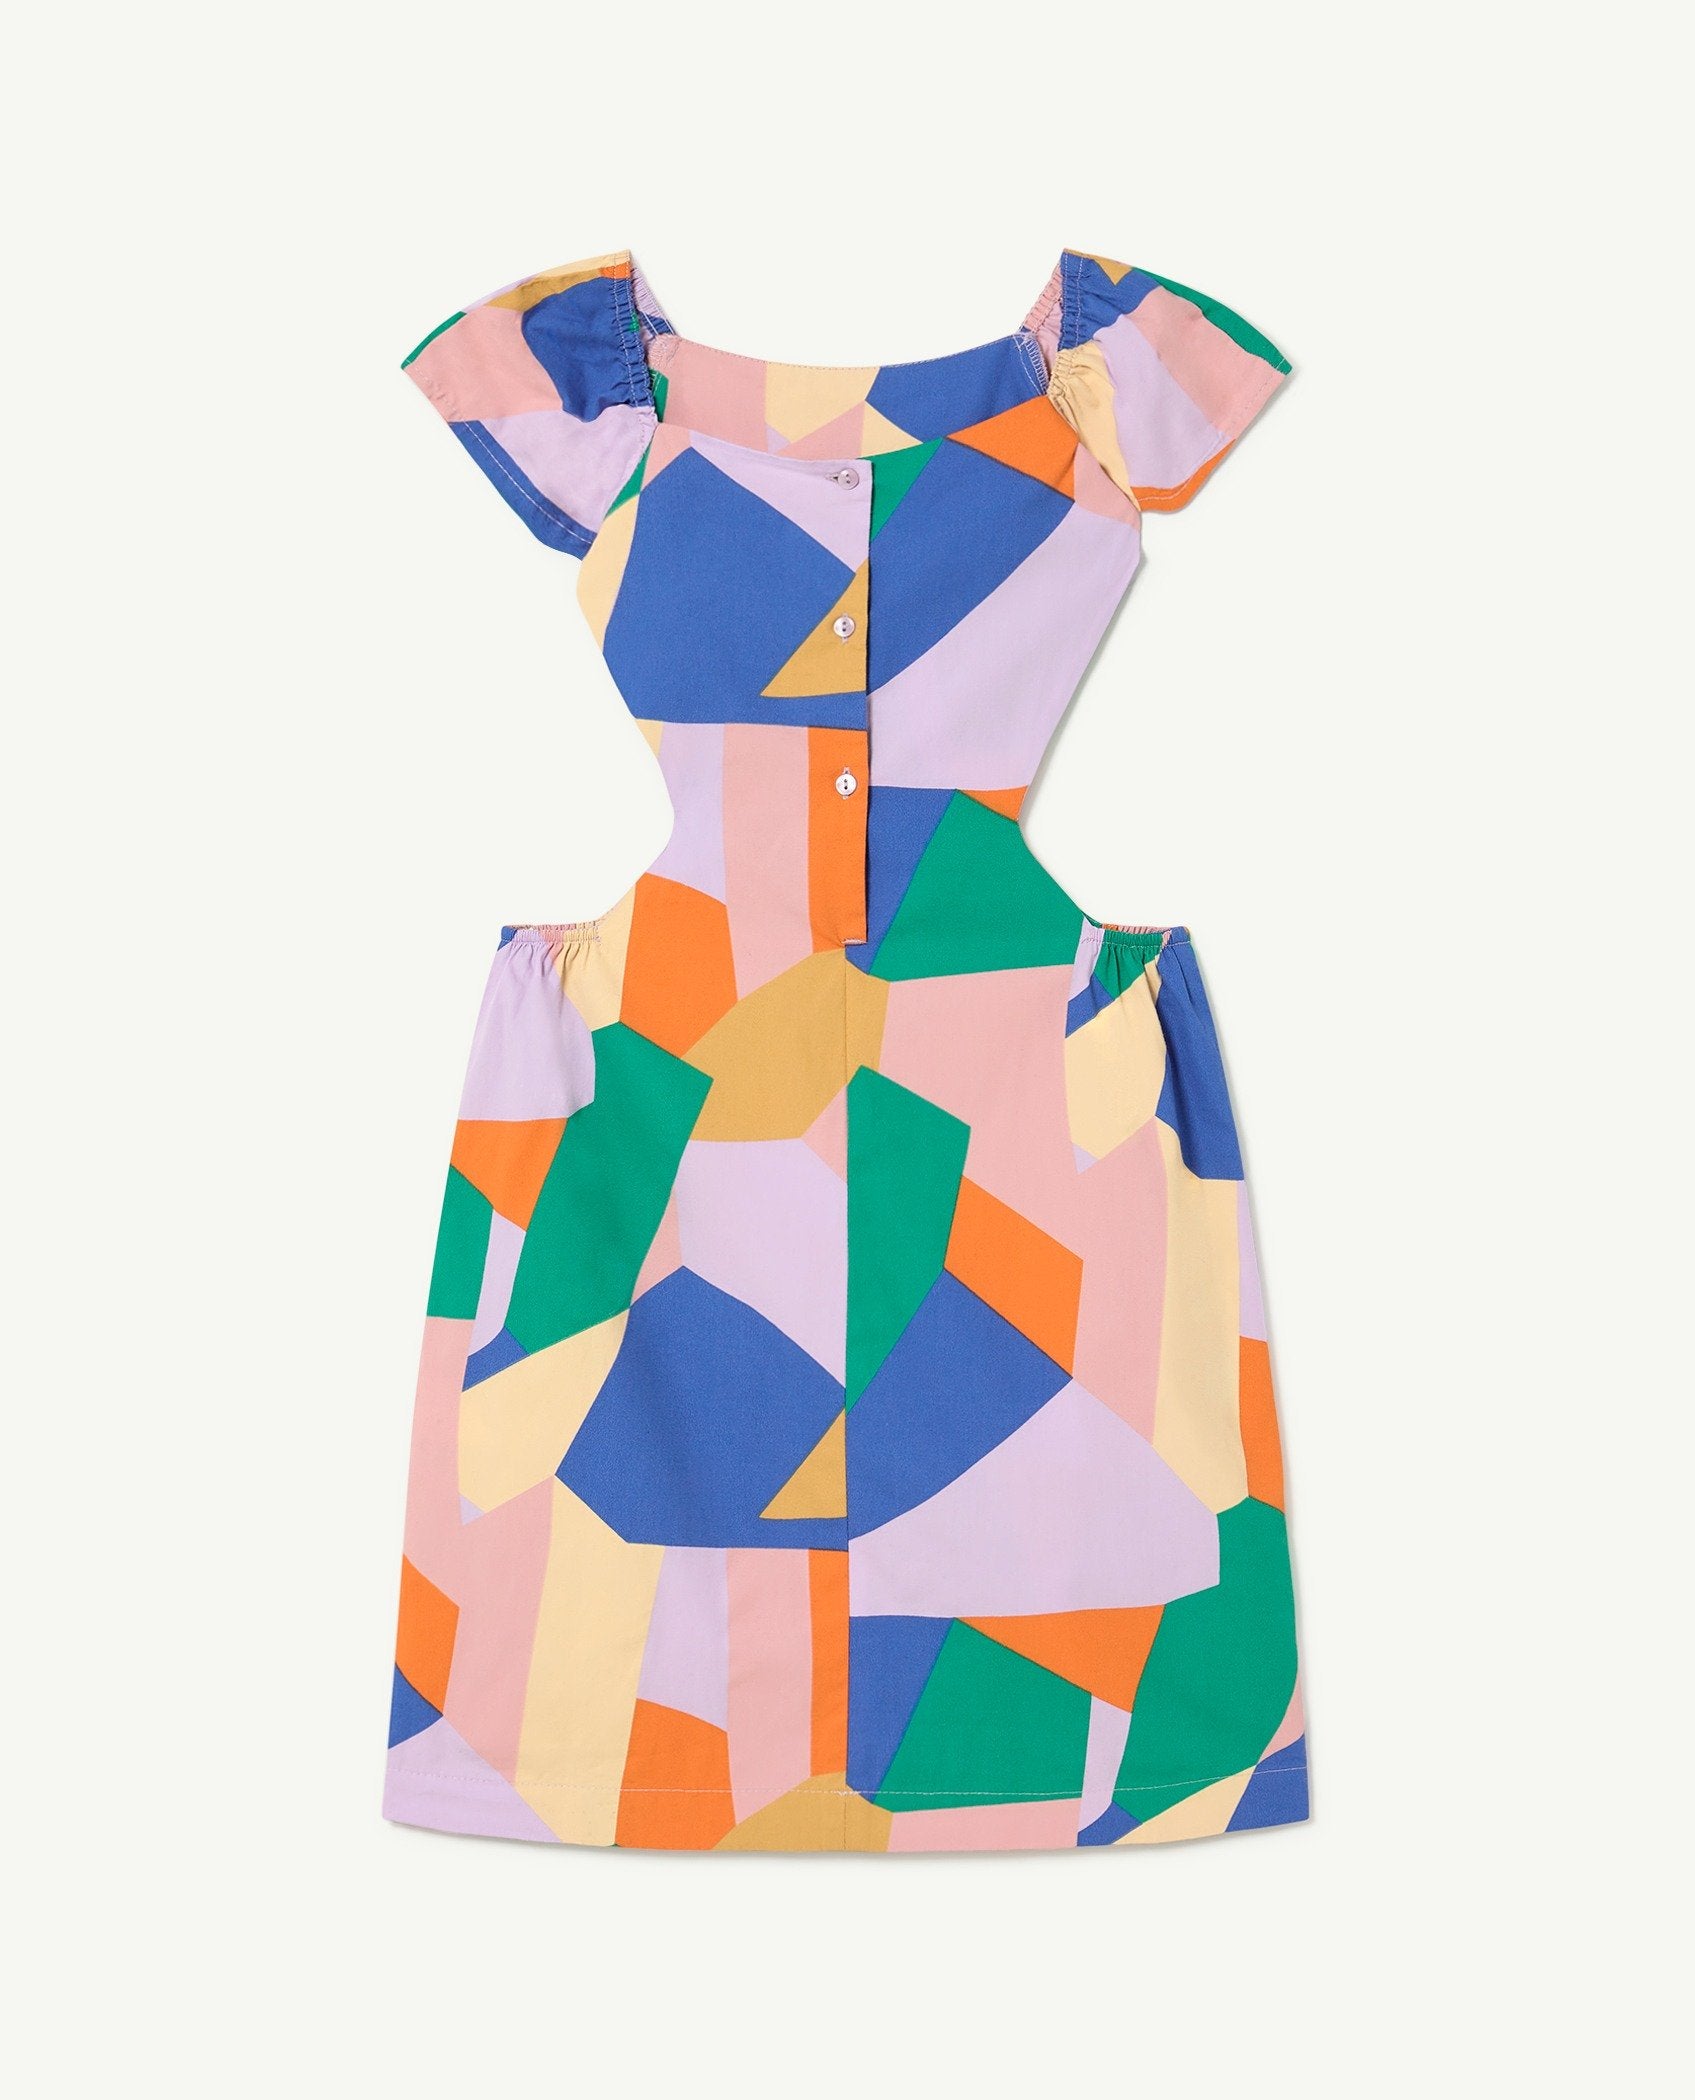 Lilac Geometric Forms Badger Dress PRODUCT BACK